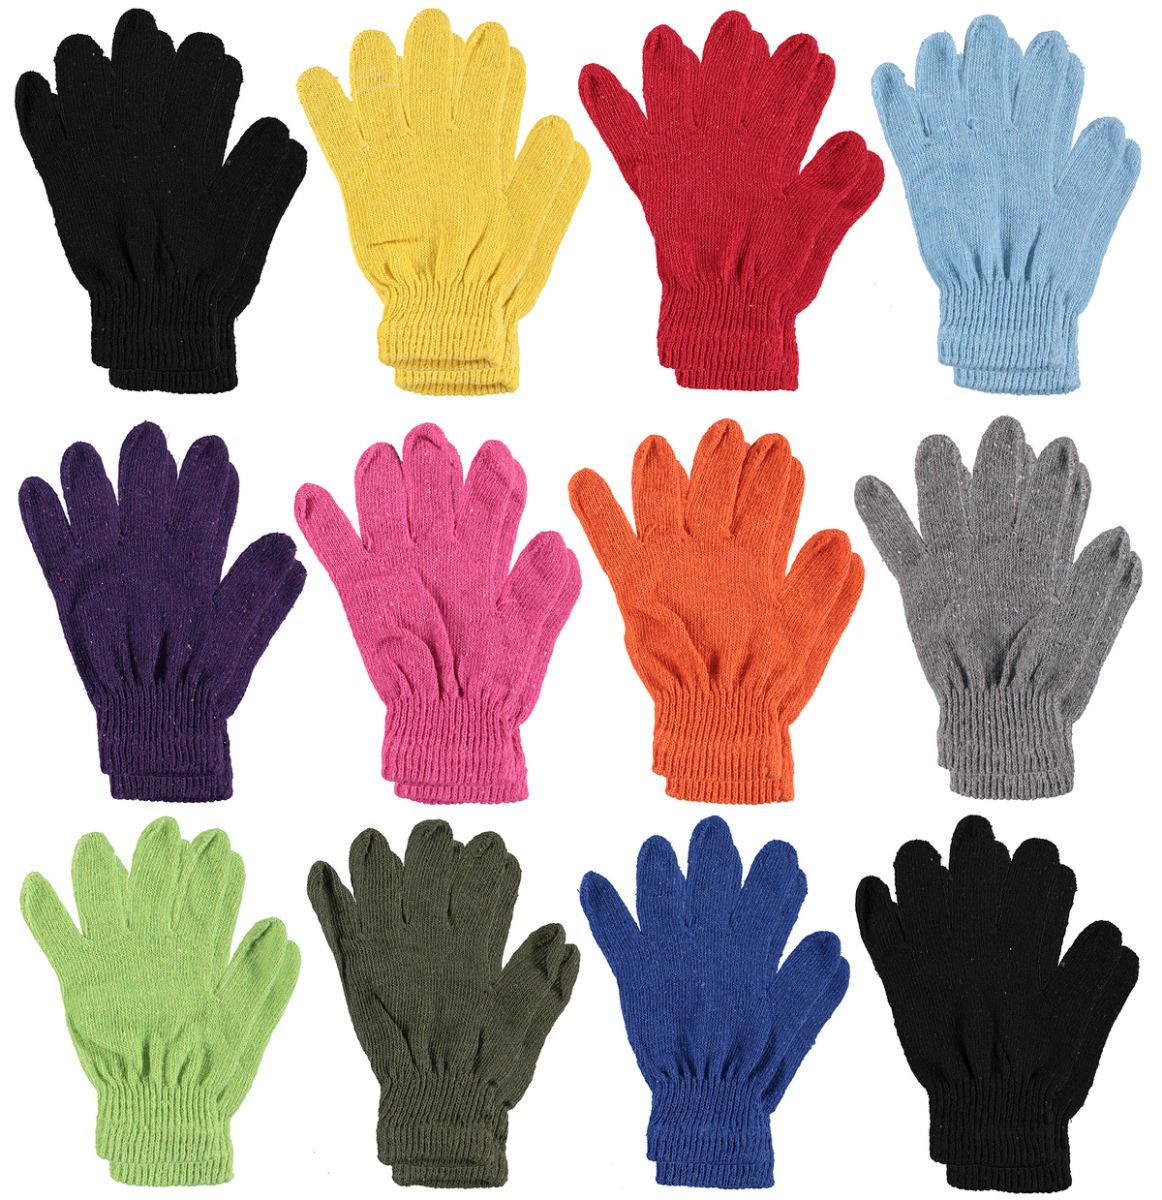 480 Pairs Yacht & Smith Kids Warm Winter Colorful Magic Stretch Gloves Ages 2-8 Bulk Pack - Winter Gear